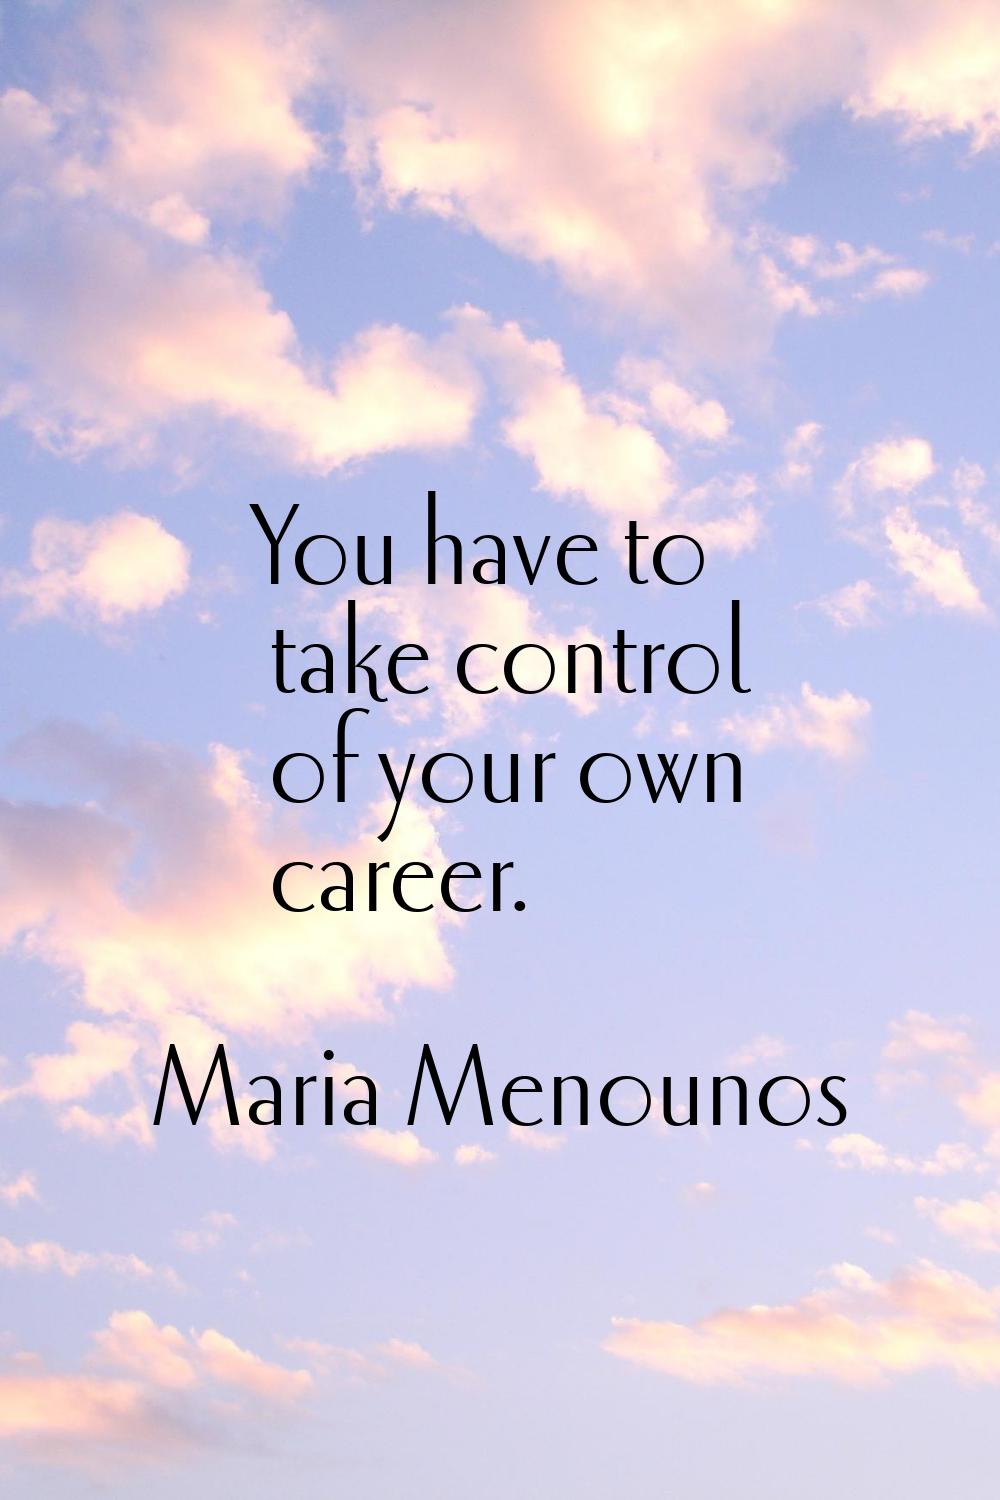 You have to take control of your own career.